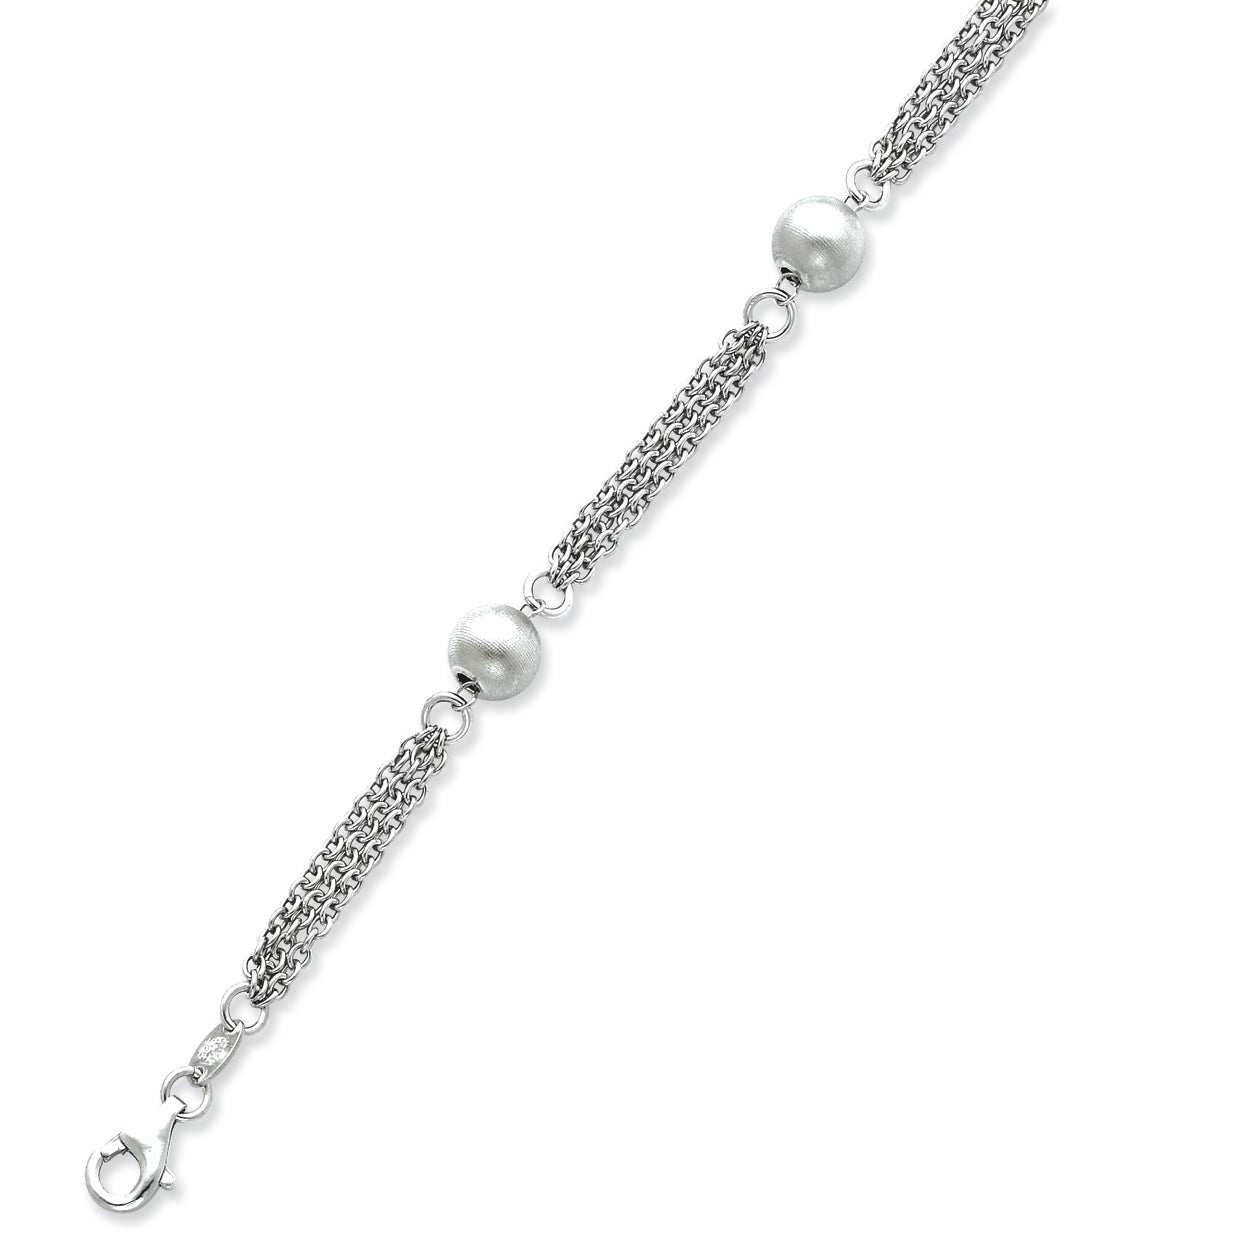 Sterling Silver Satin Bead Bracelet 7.5 Inches